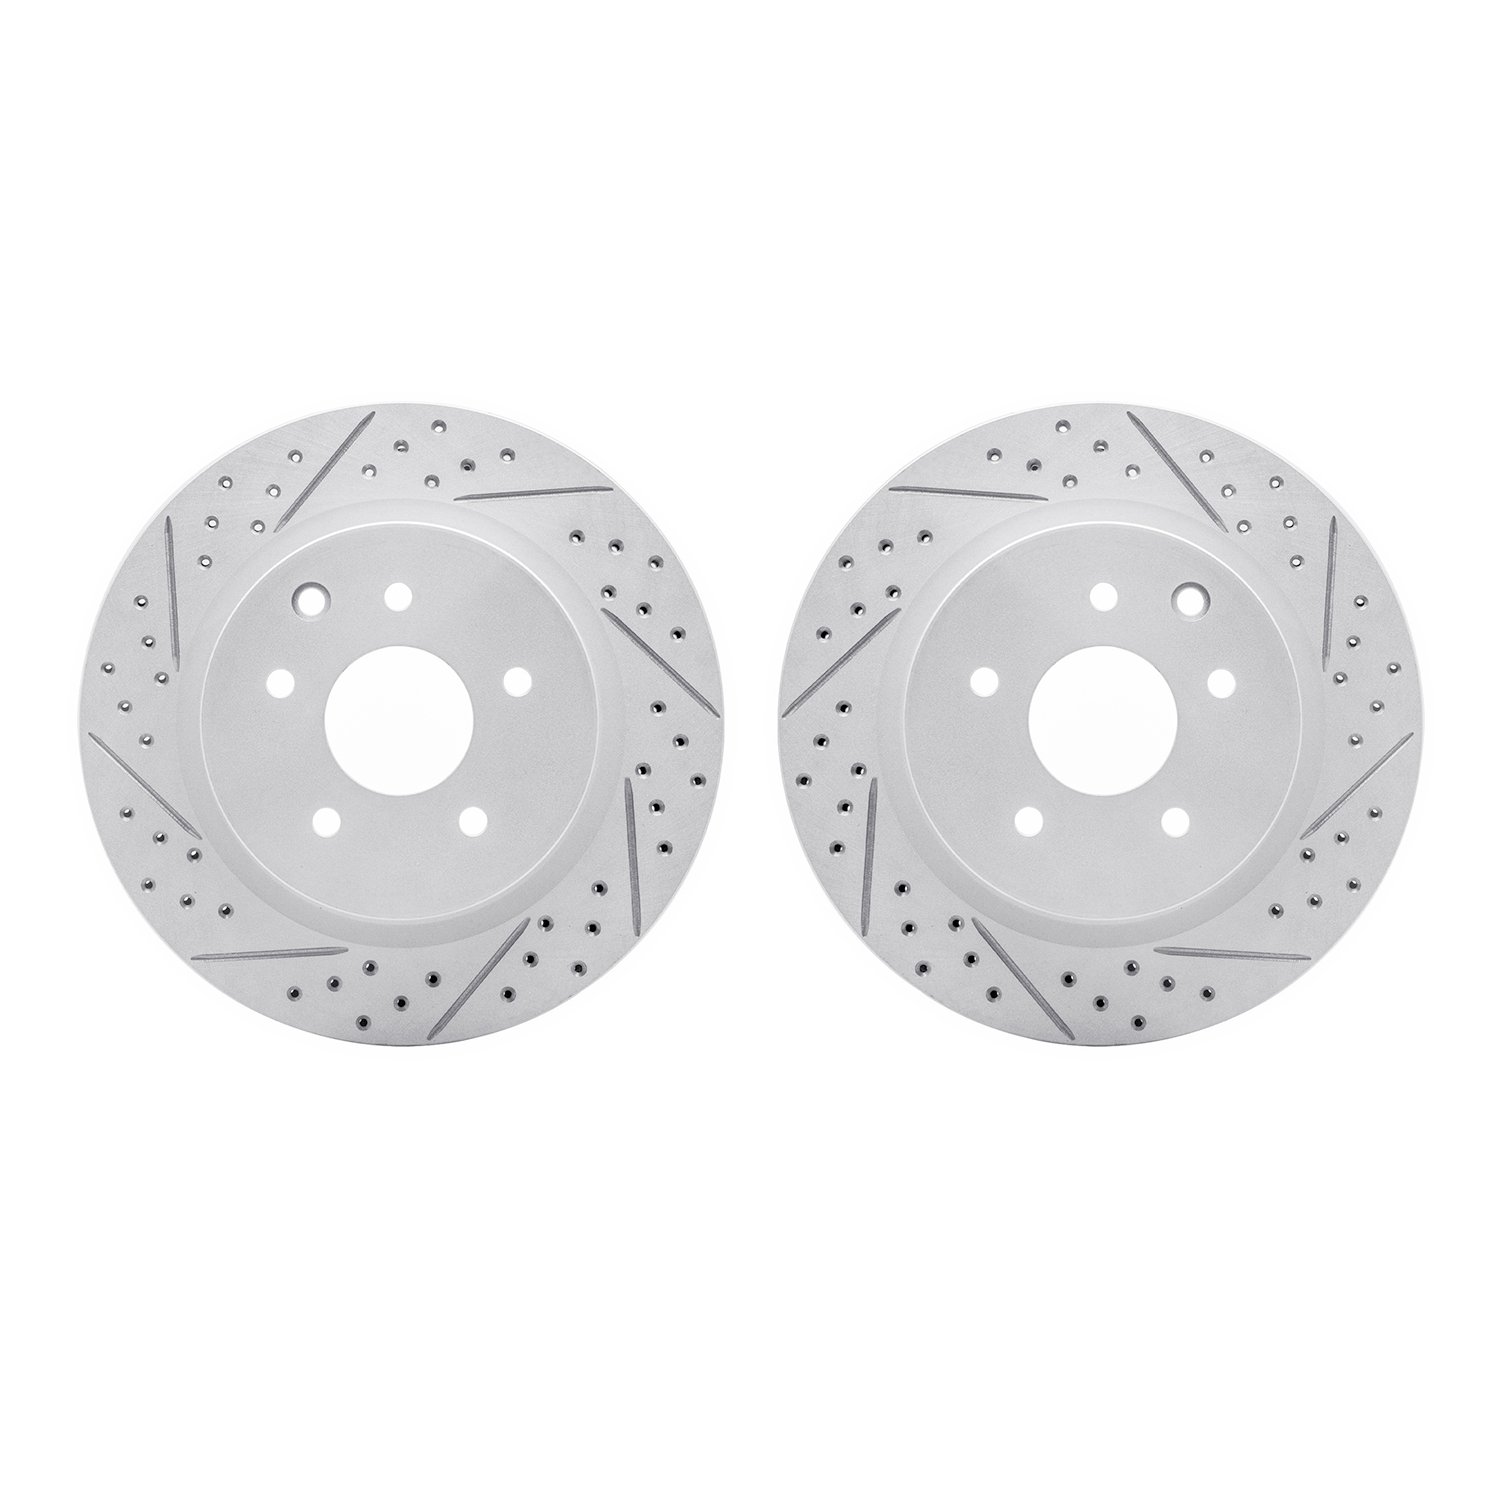 2002-67043 Geoperformance Drilled/Slotted Brake Rotors, Fits Select Infiniti/Nissan, Position: Rear